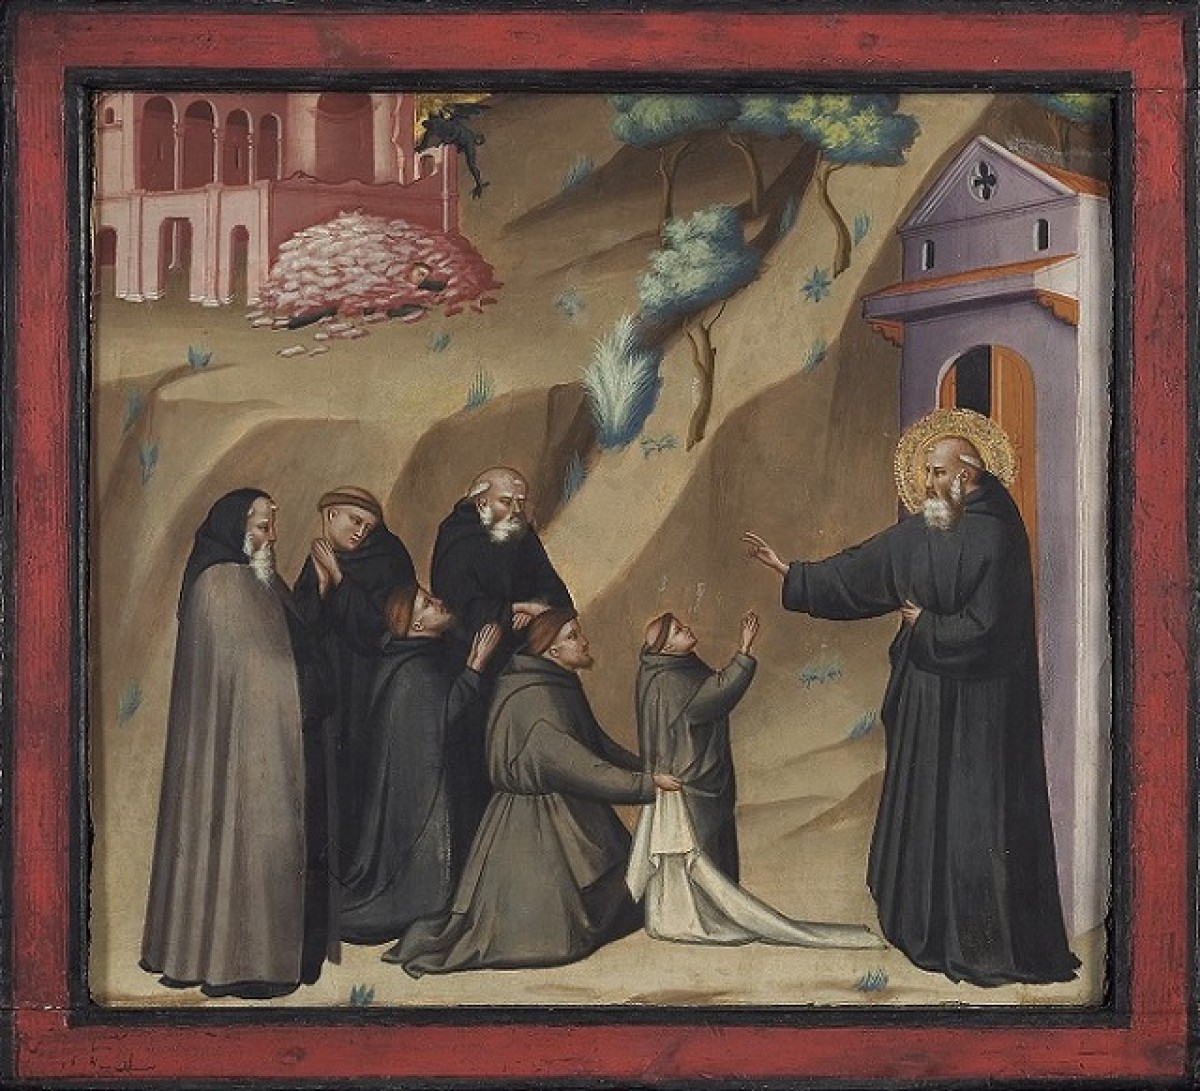 St. Benedict Restores Life to a Young Monk, painting by Giovanni del Biondo